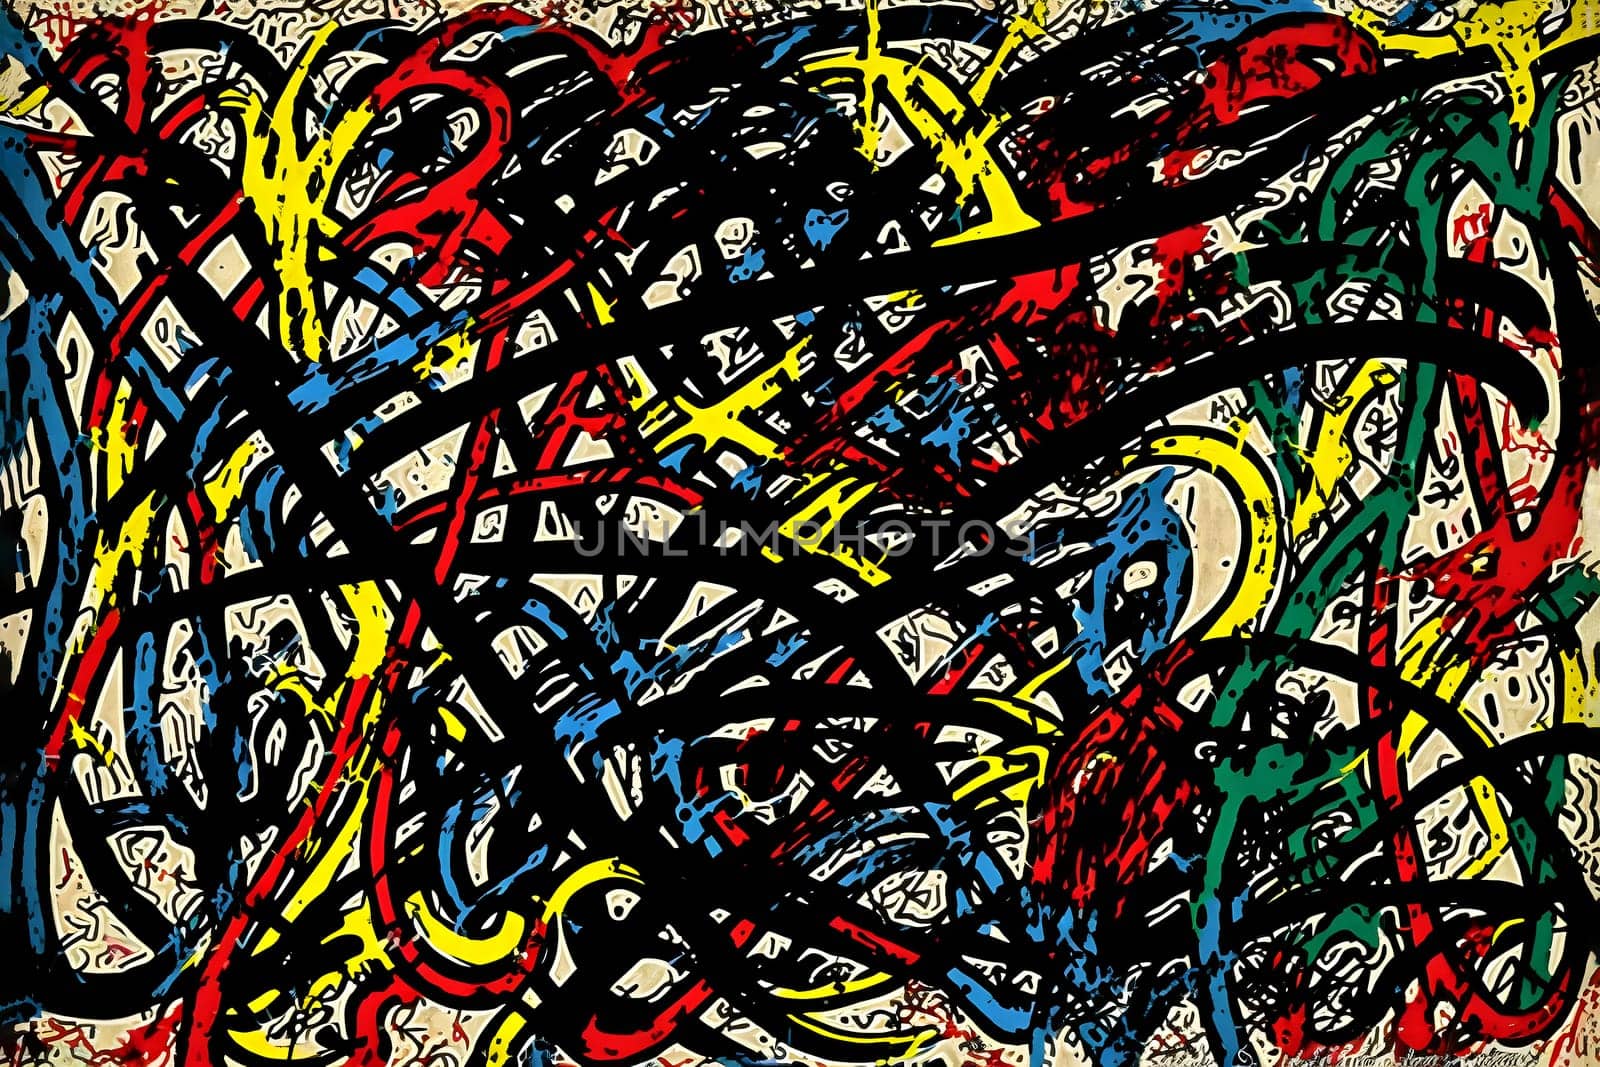 abstract 2d art of chaotic lines, neural network generated art. Digitally generated image. Not based on any actual scene or pattern.